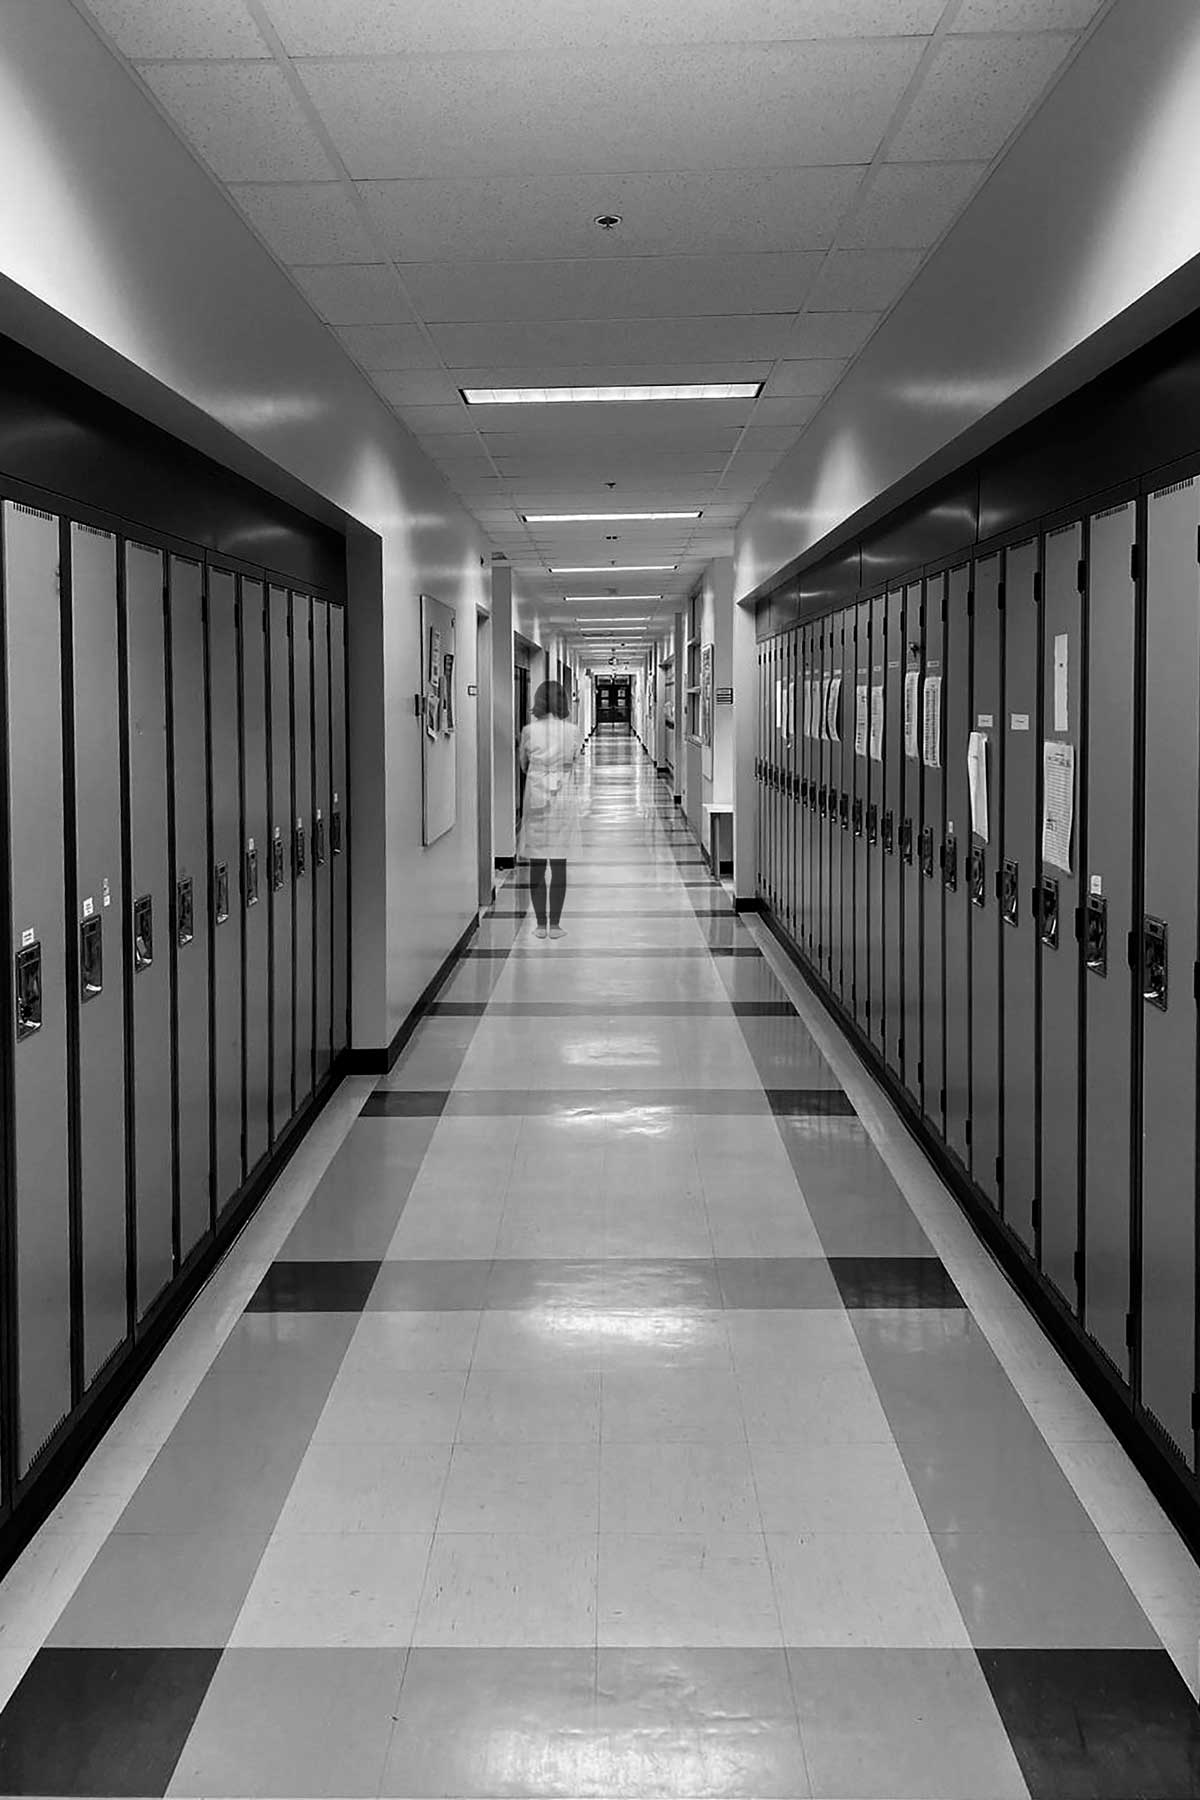 A female scientist is a long corridor from a university building. There are countless doors on either side.